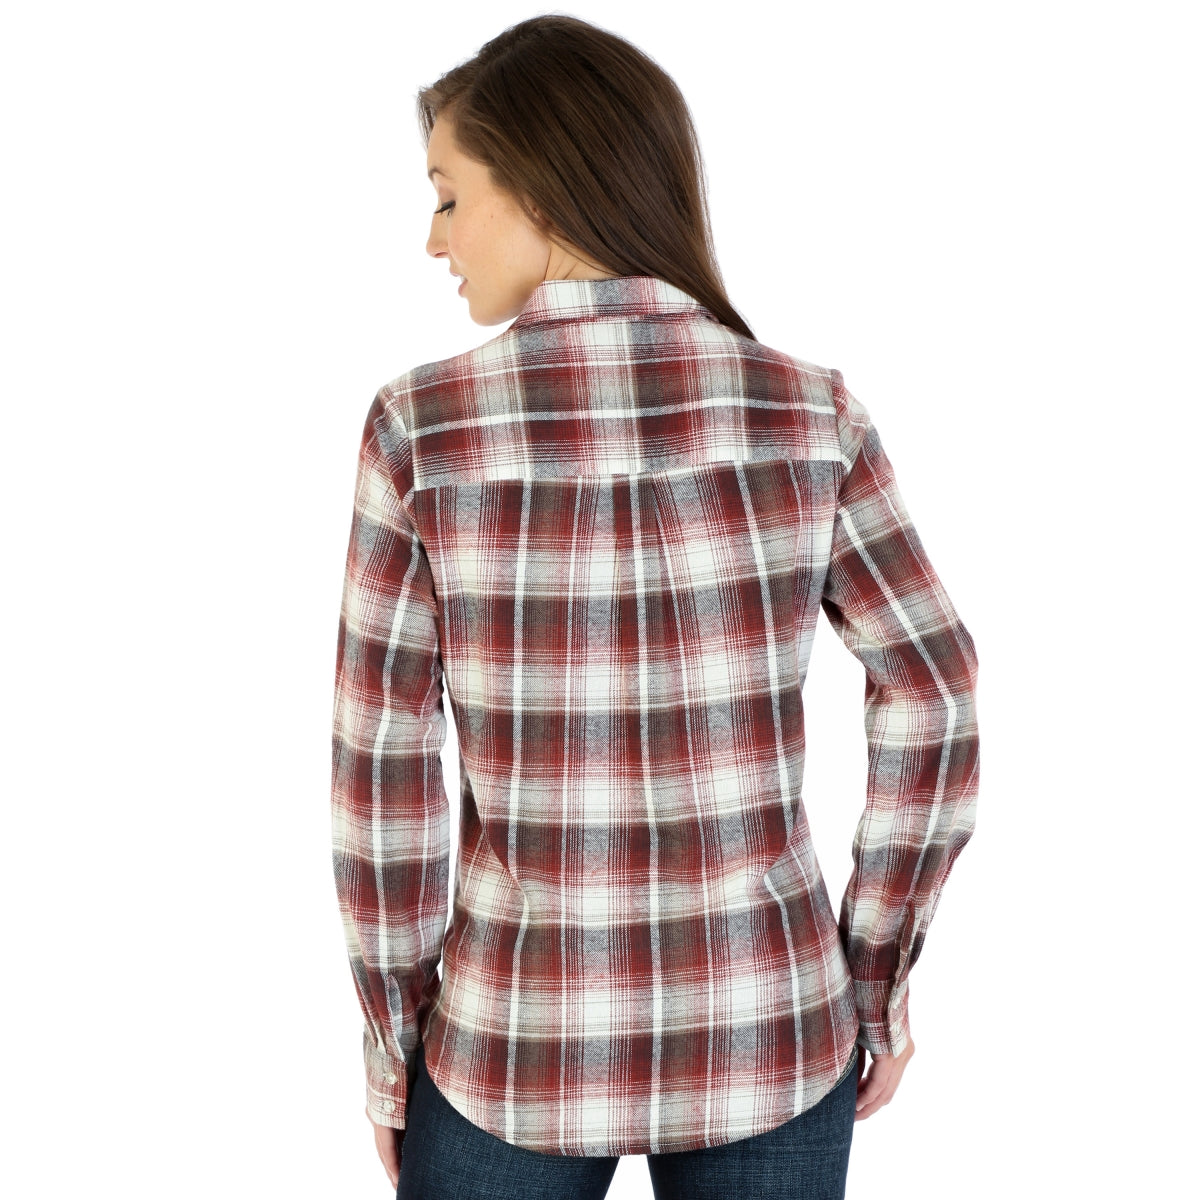 Adrelle Flannel